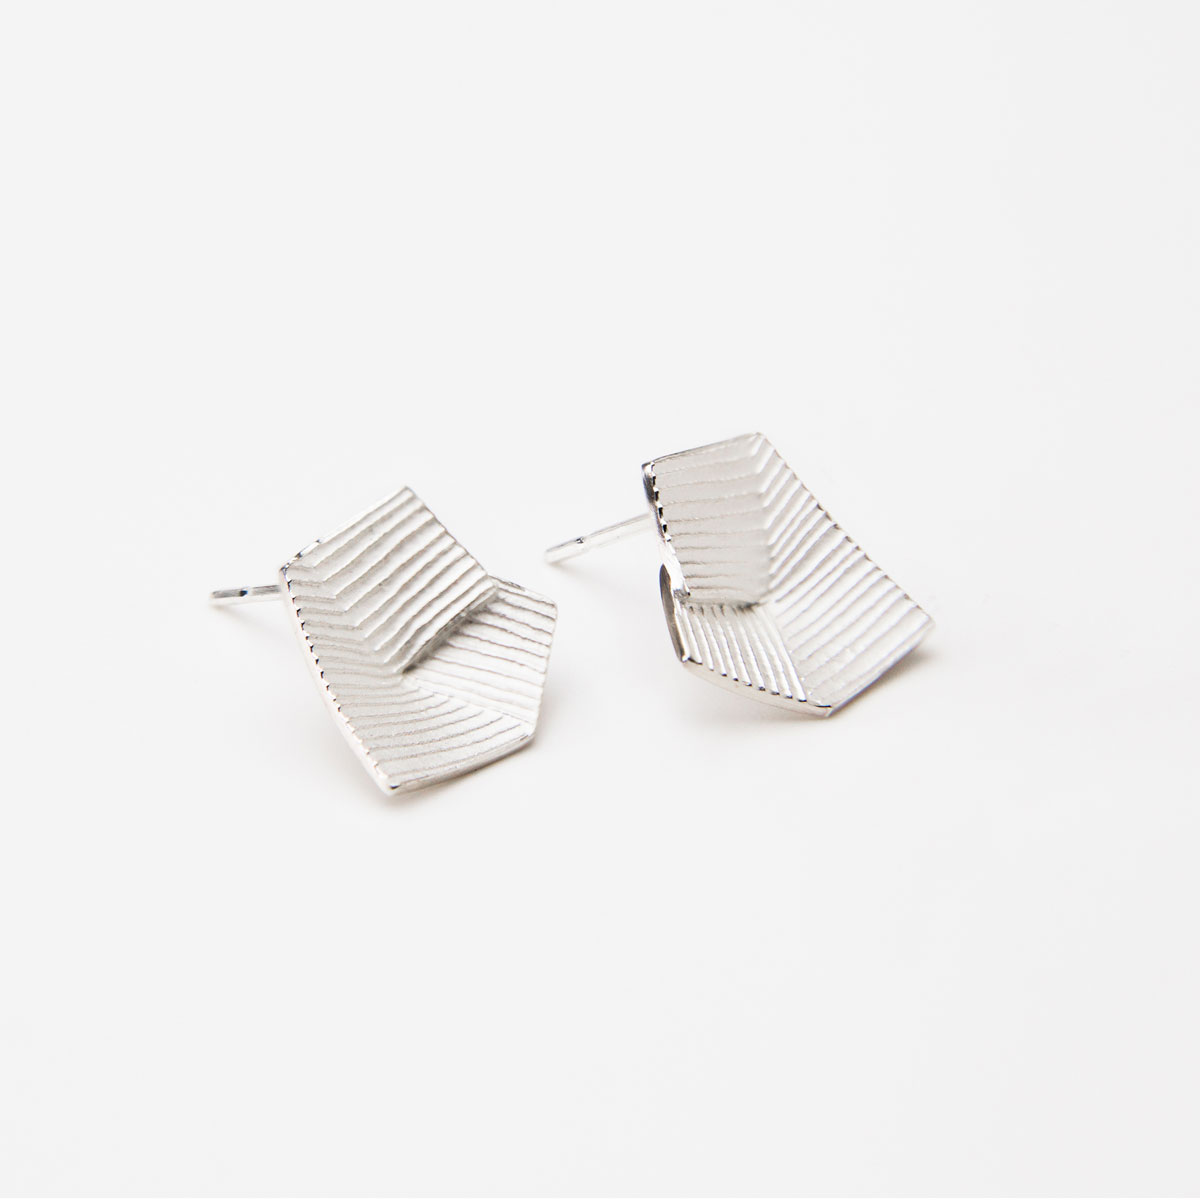 ‘Lines in Motion’ Silver Earrings Small